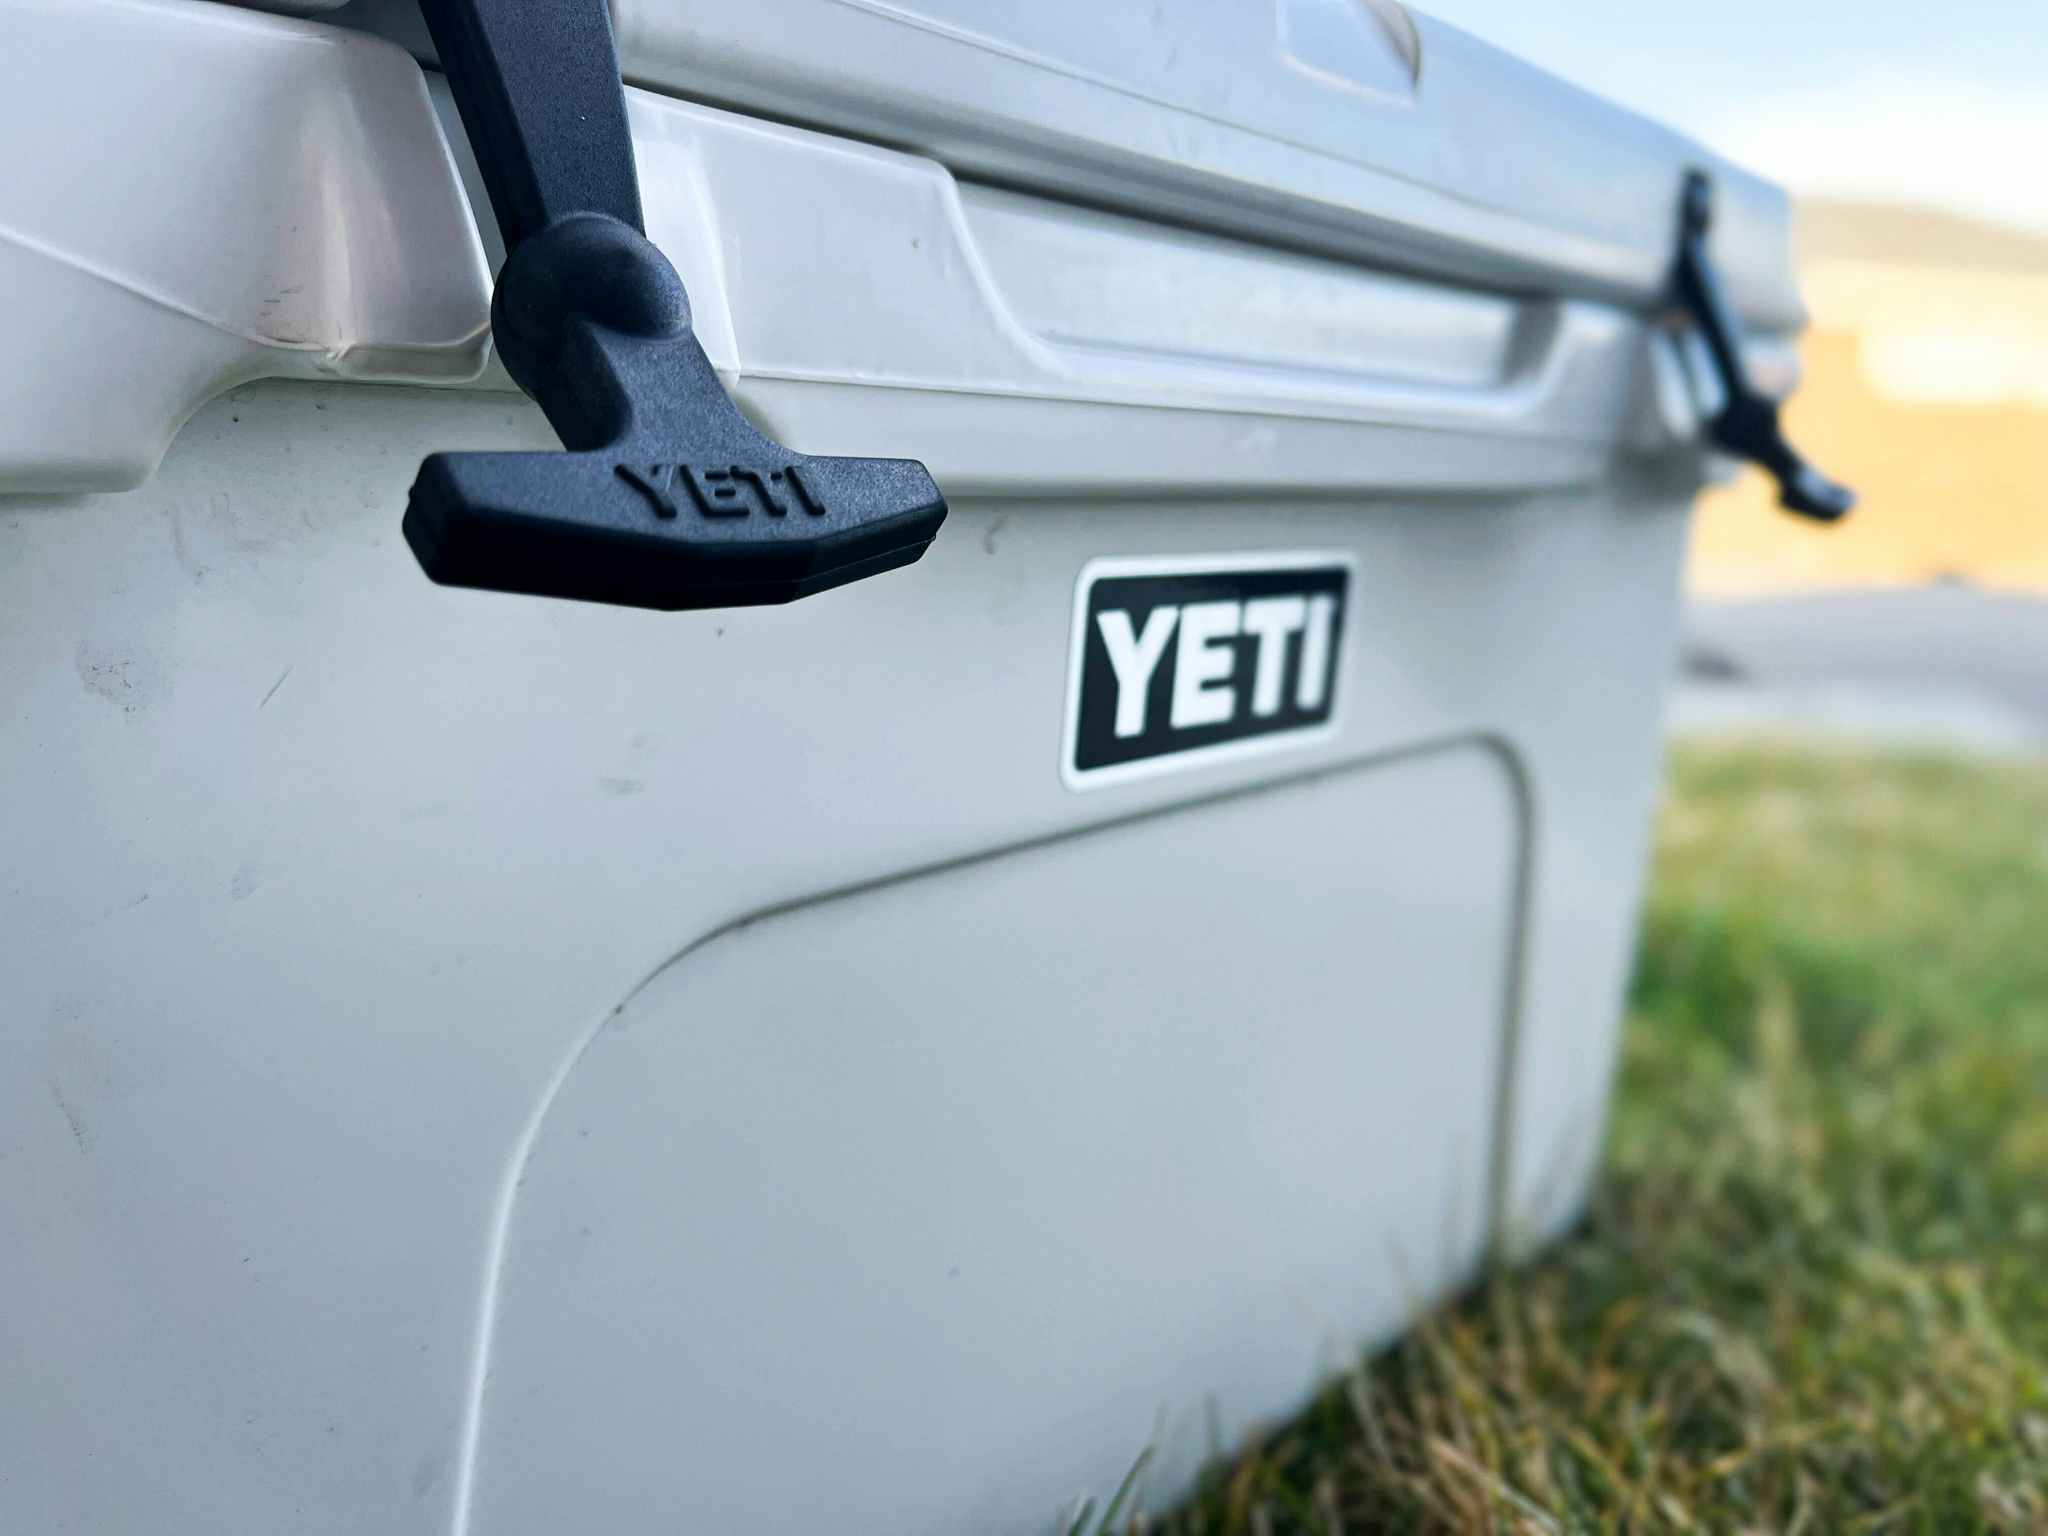 Save 20% on Yeti coolers and more, today only: Tundra 35 Hard Shell at $200  ($50 off)